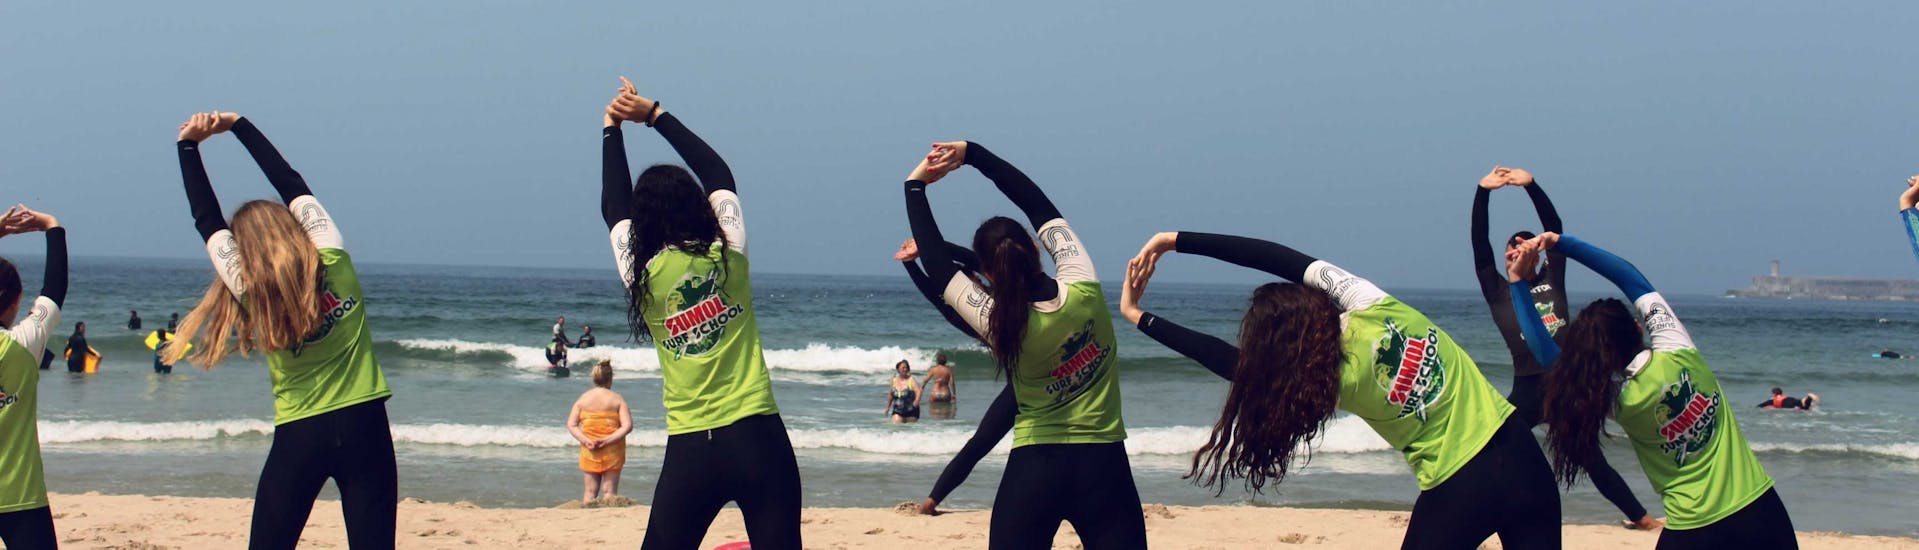 Participants warming up before their surfing Lesson in Matosinhos (Porto)  Surfing Life Porto